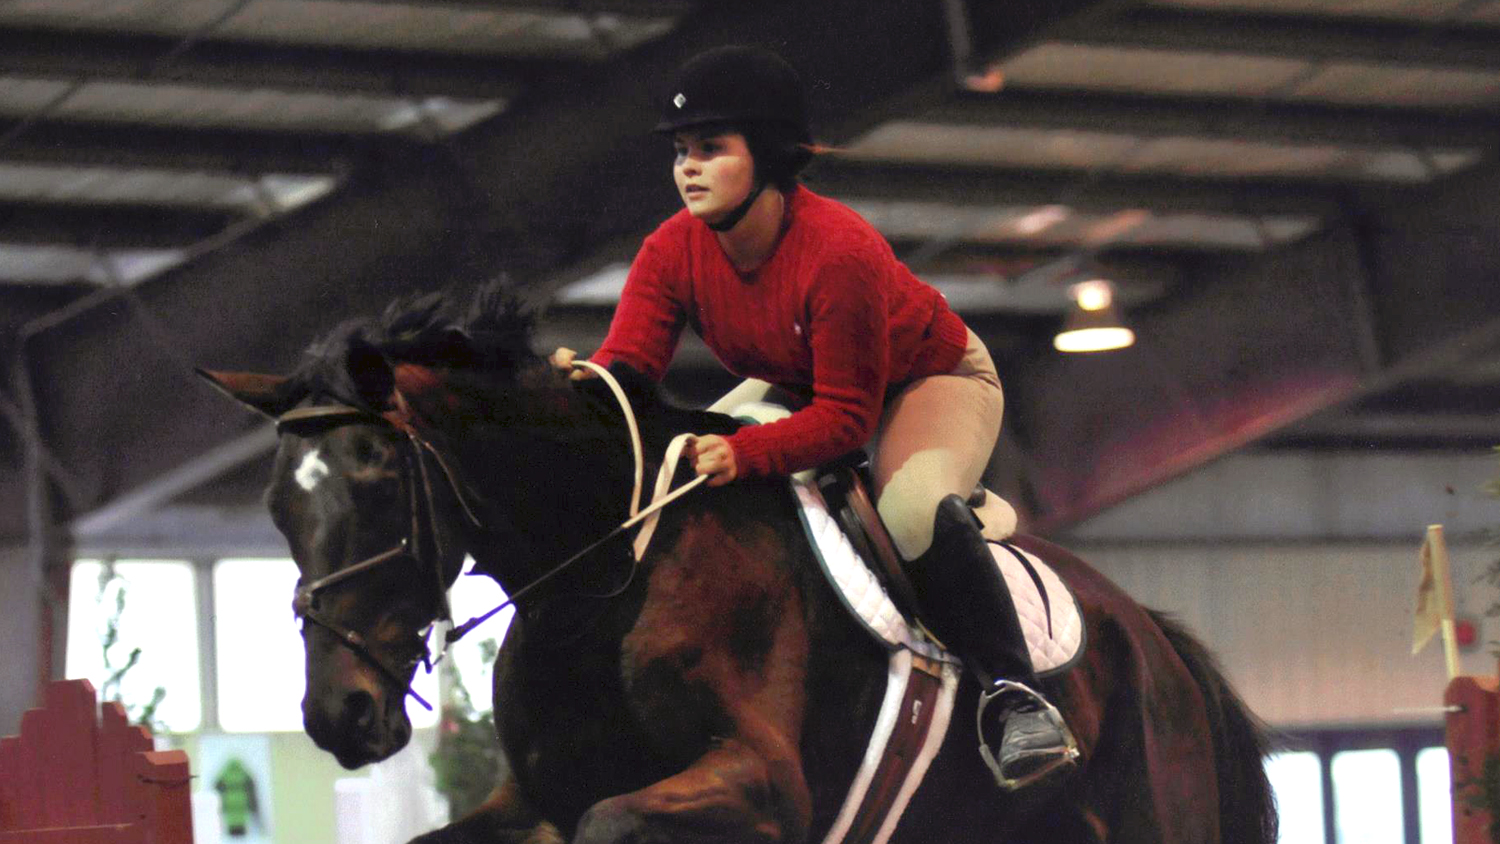 Student riding a horse in an equestrian competition